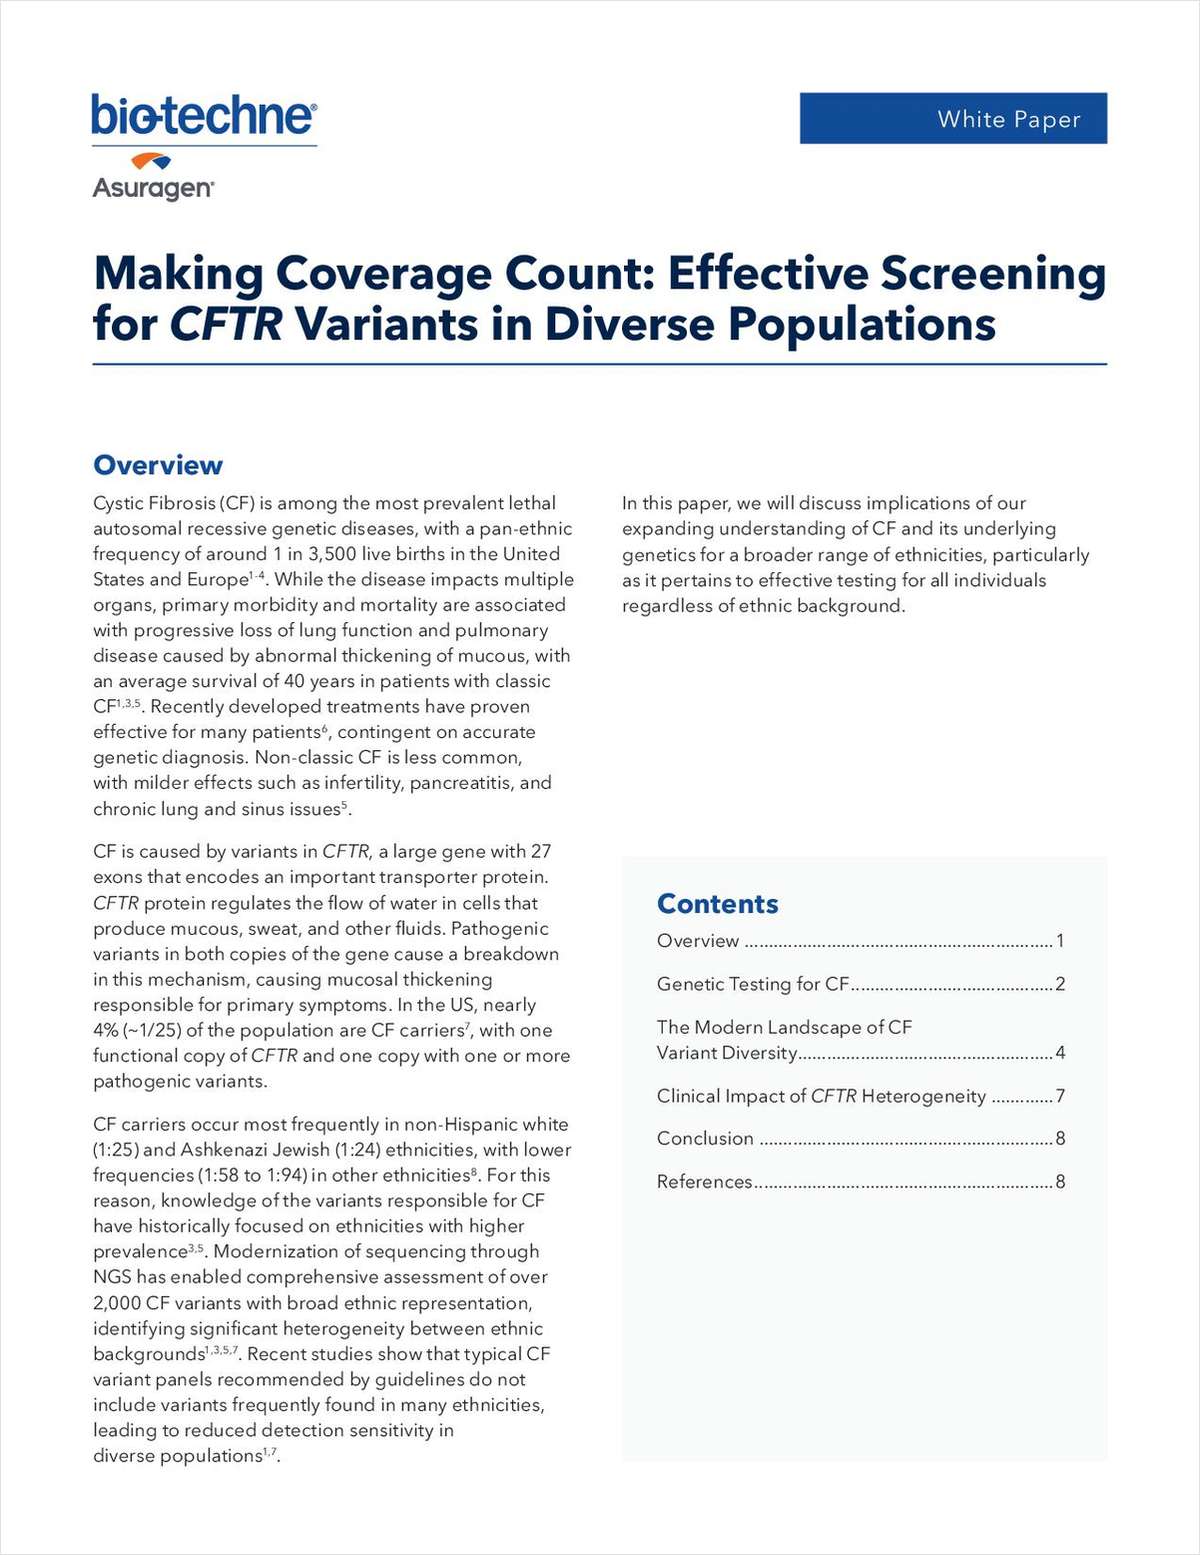 Making Coverage Count: Effective Screening for CFTR Variants in Diverse Populations